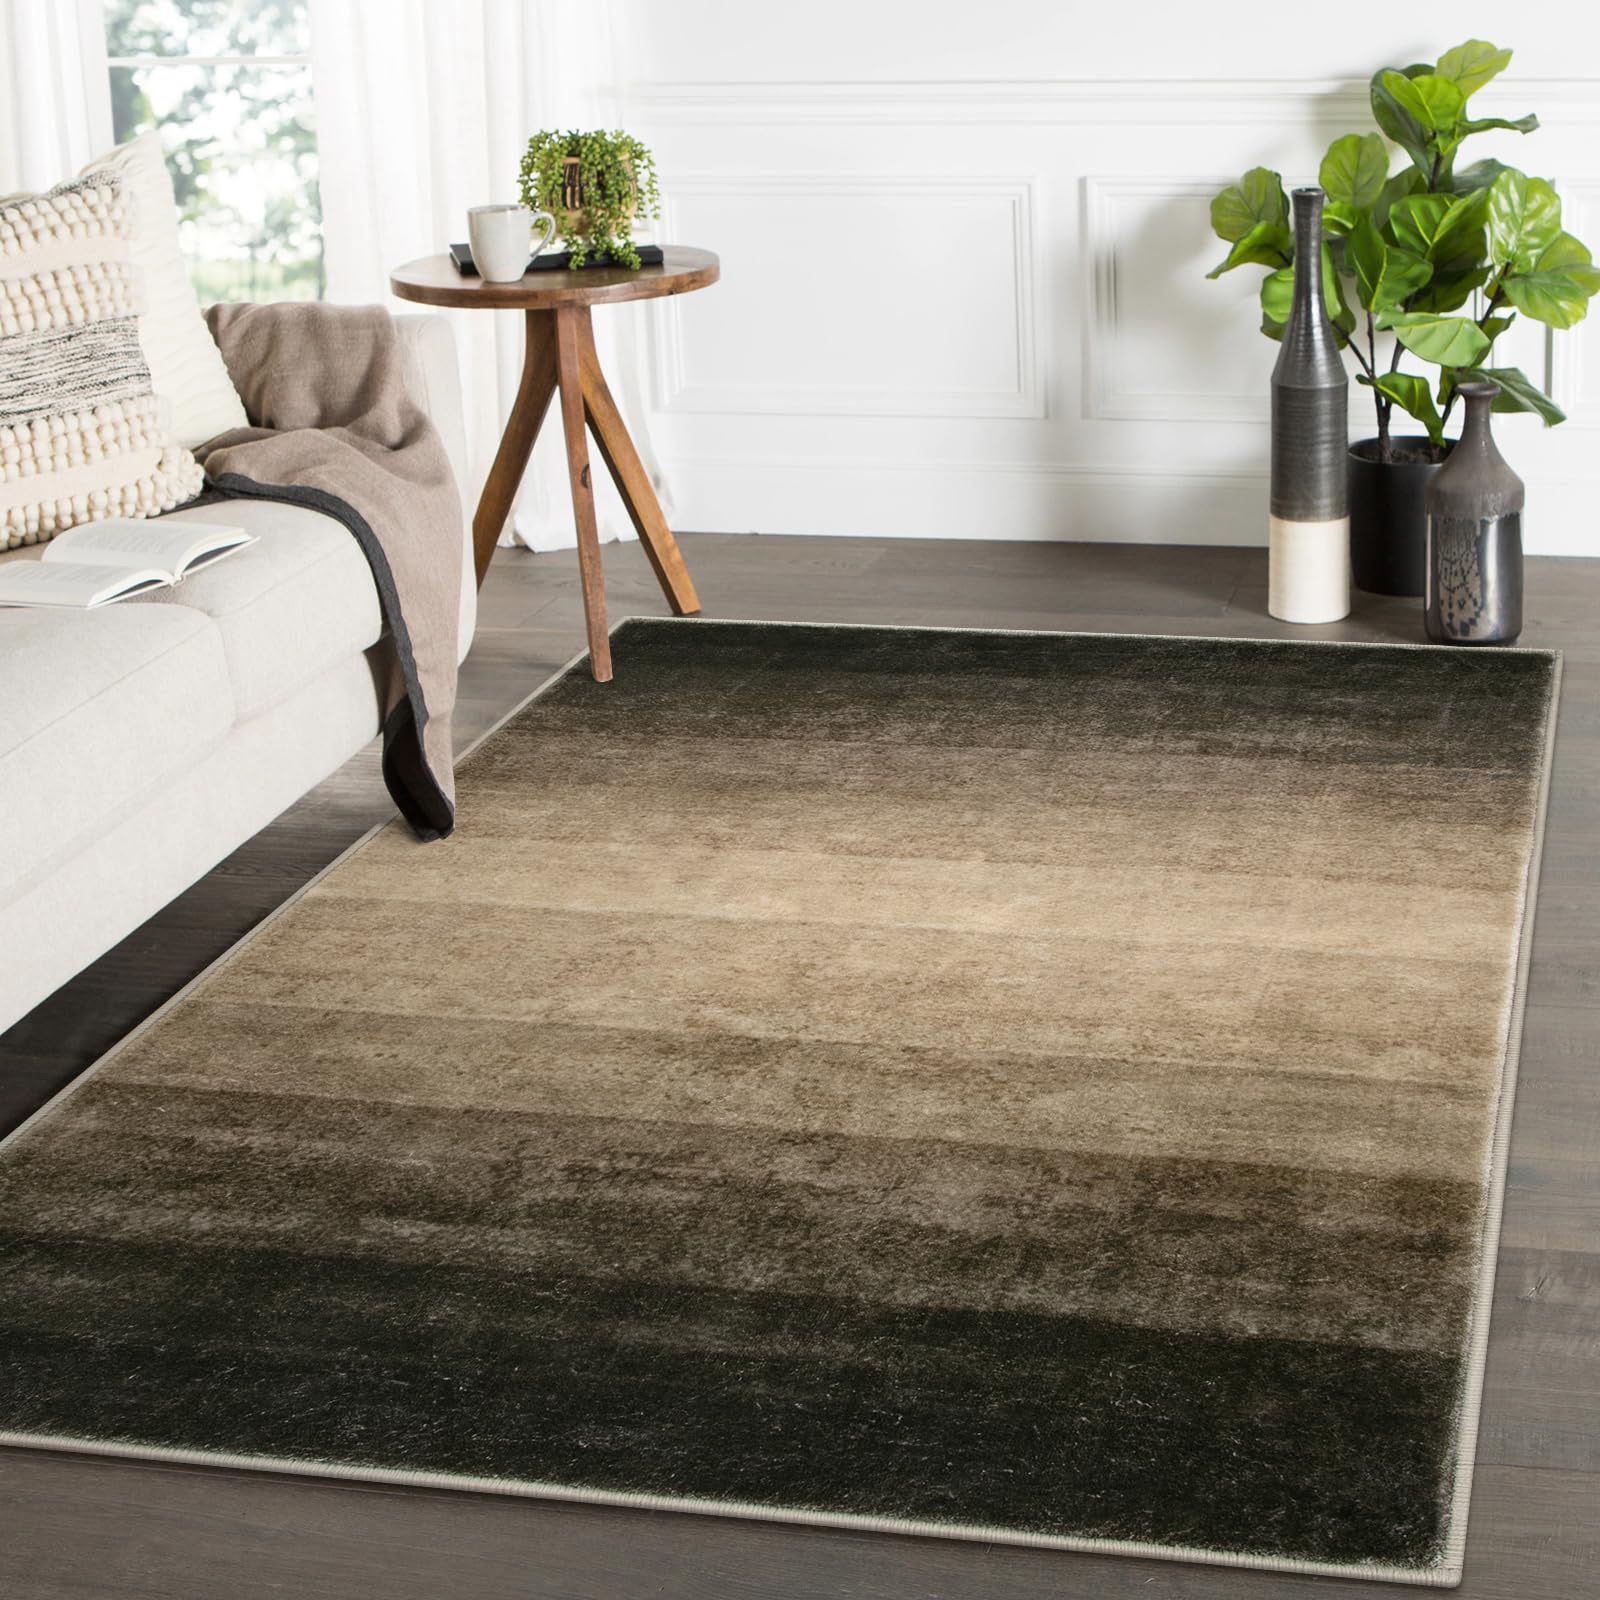 Lahome 8x10 Living Room Rugs, Washable Black Rug for Bedroom Brown Large Area Rug with Ombre, Modern Soft Grey Rug Non Slip Non-Shedding Low Pile Carp